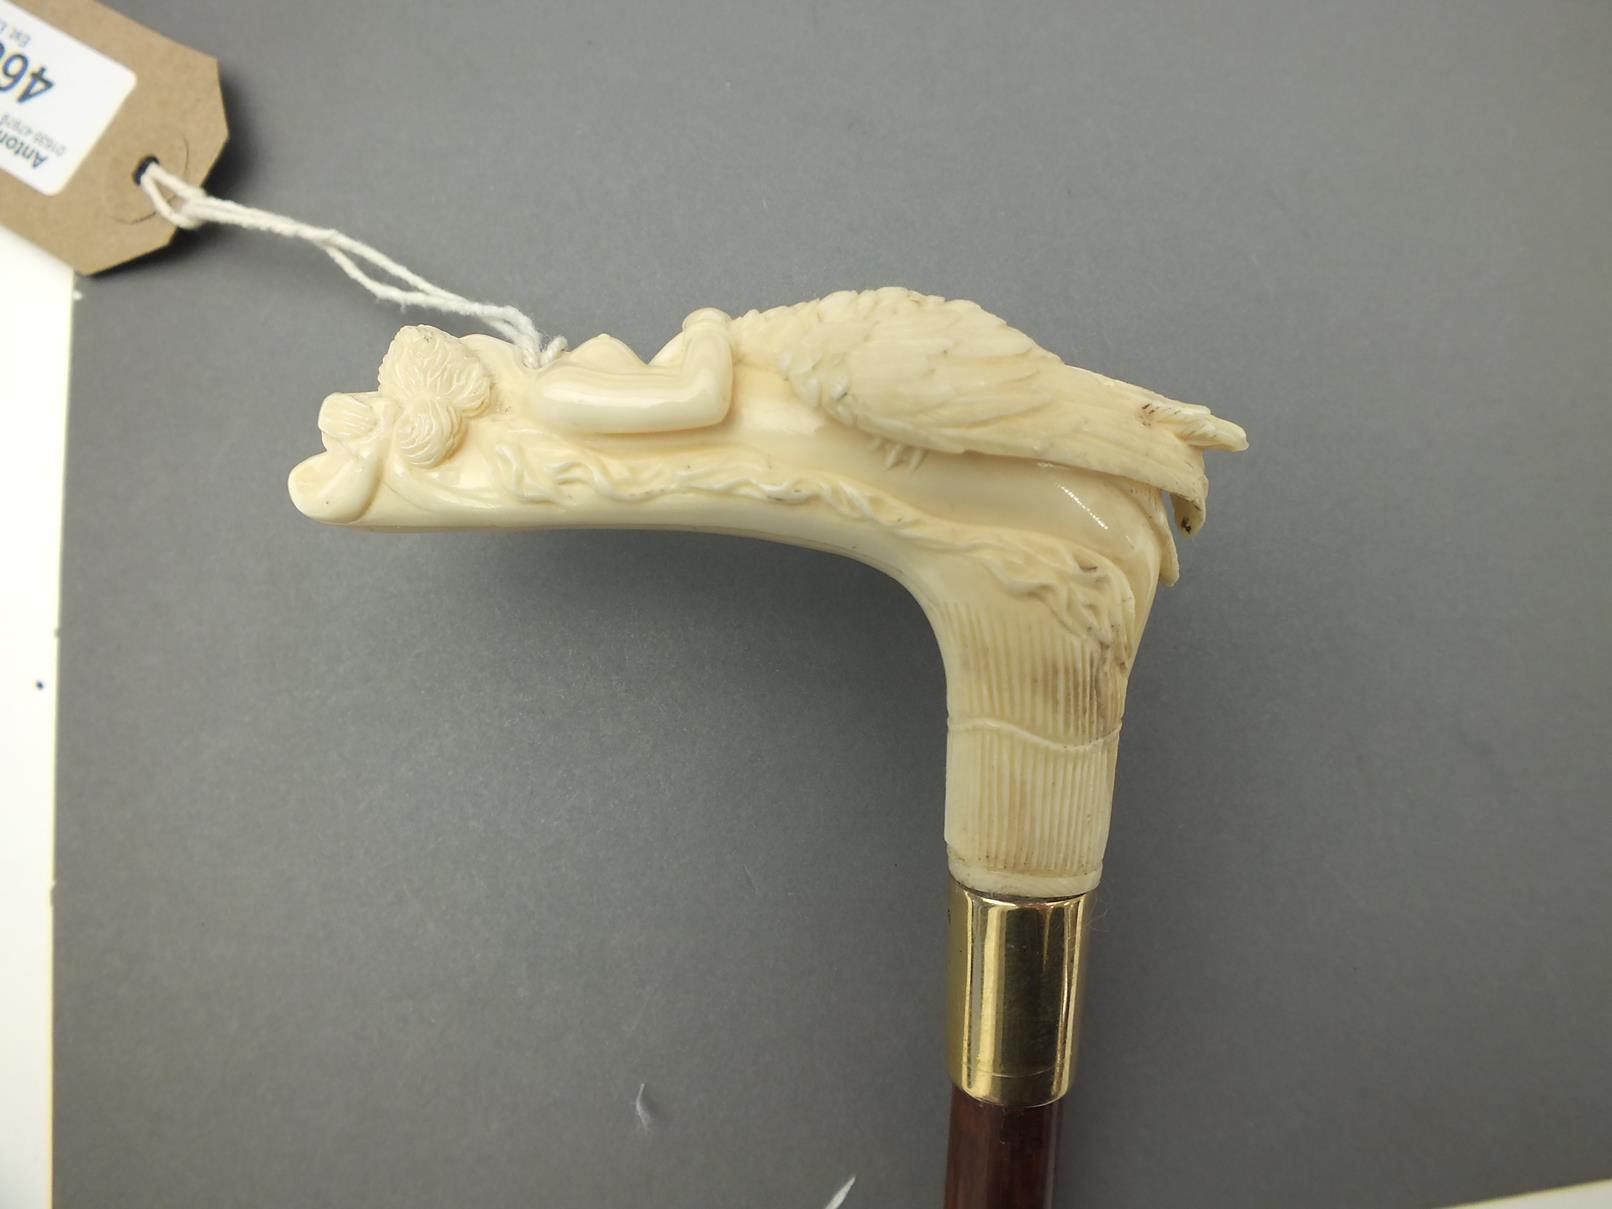 AN EARLY 20TH CENTURY WALKING CANE, the ivory candle carved as Leda and the Swan, above 18ct gold - Image 4 of 10